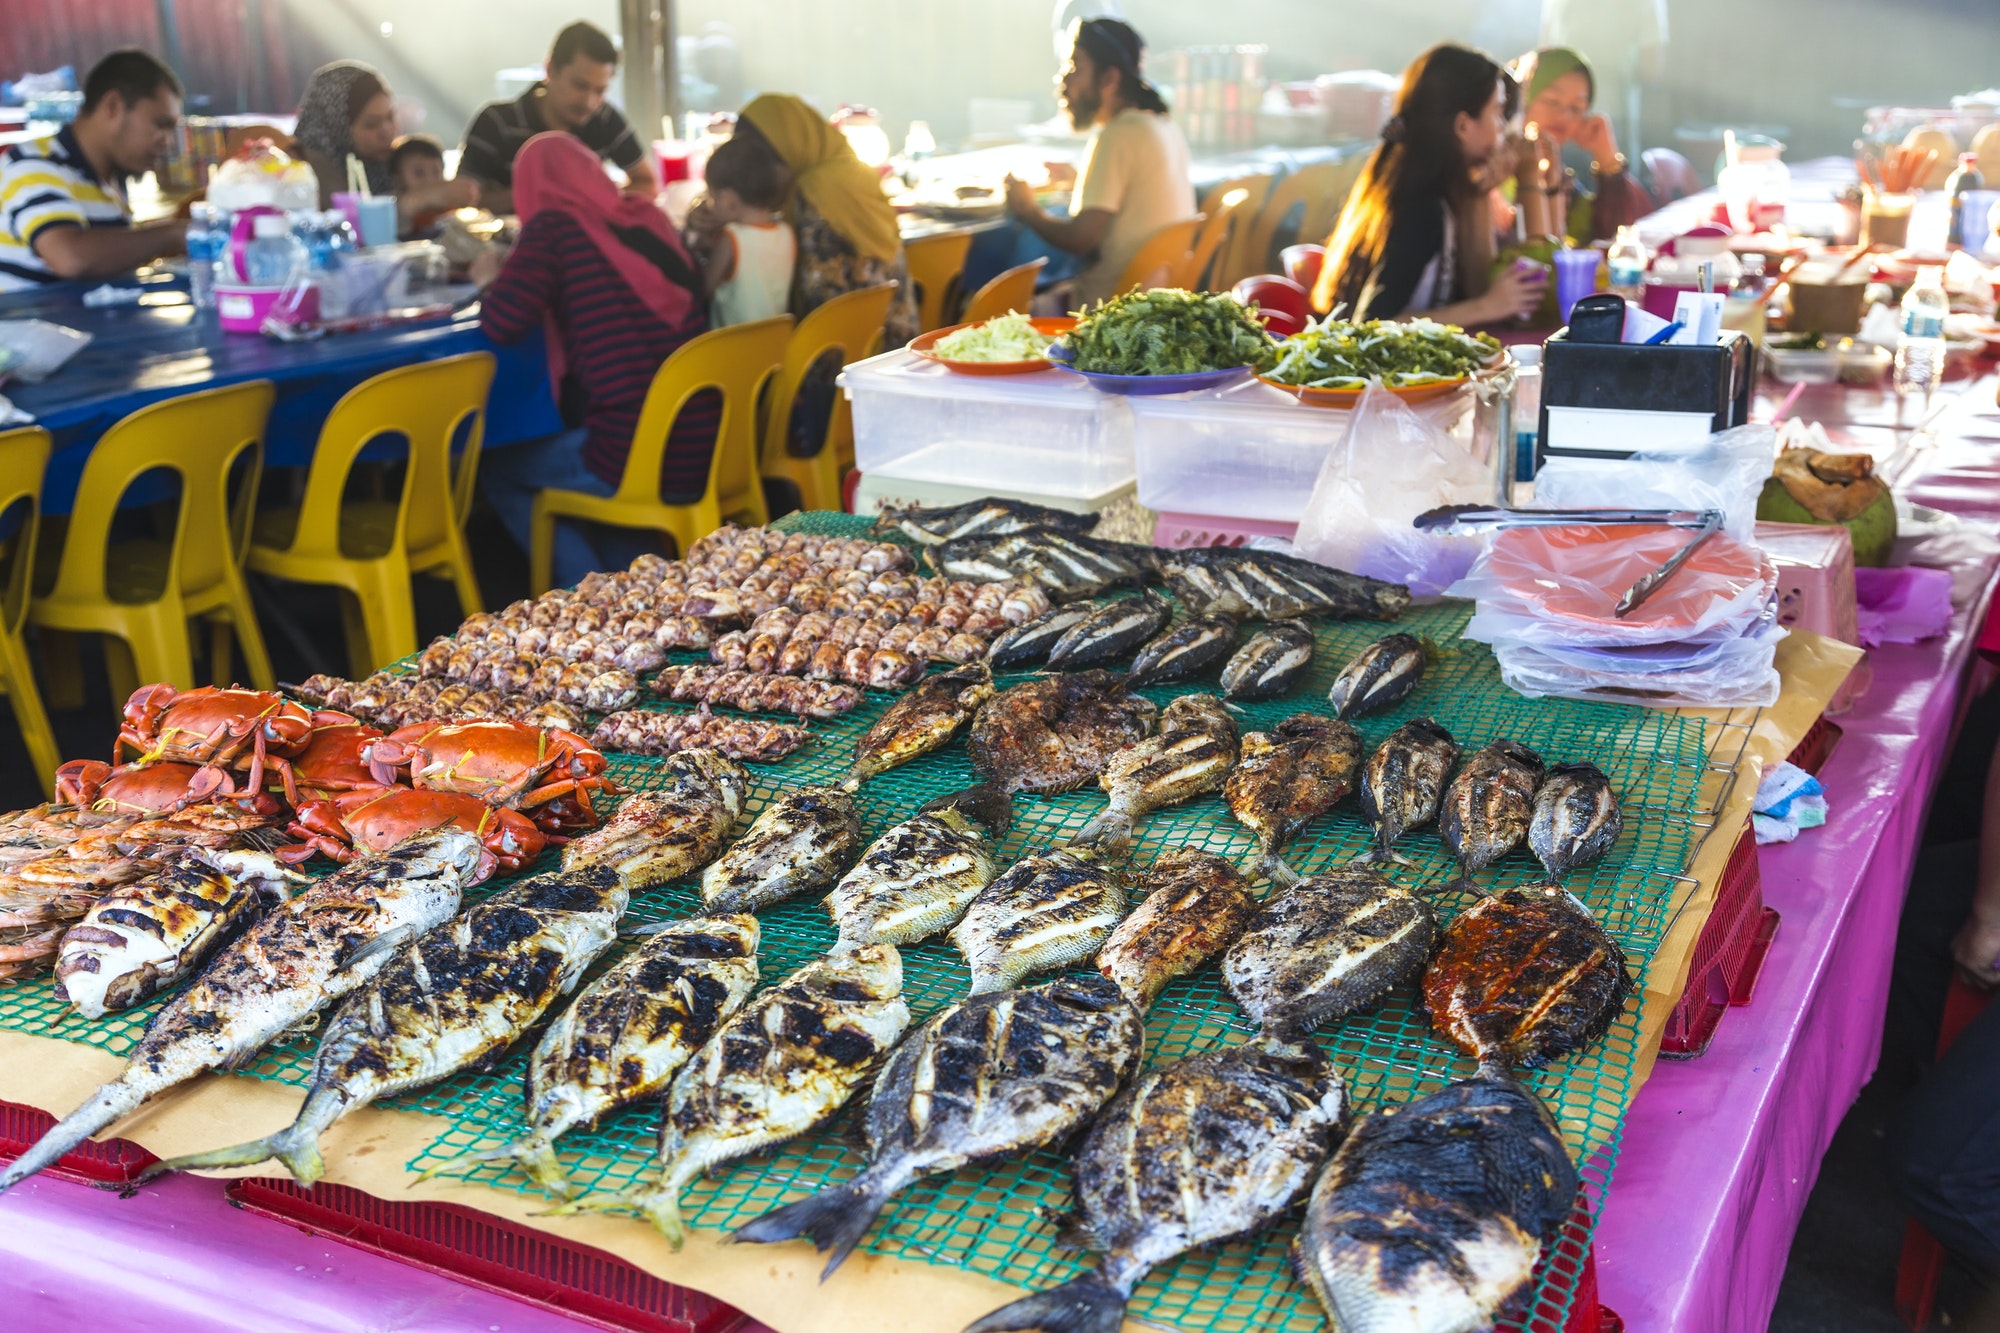 Grilled fish on a table at a food market restaurant